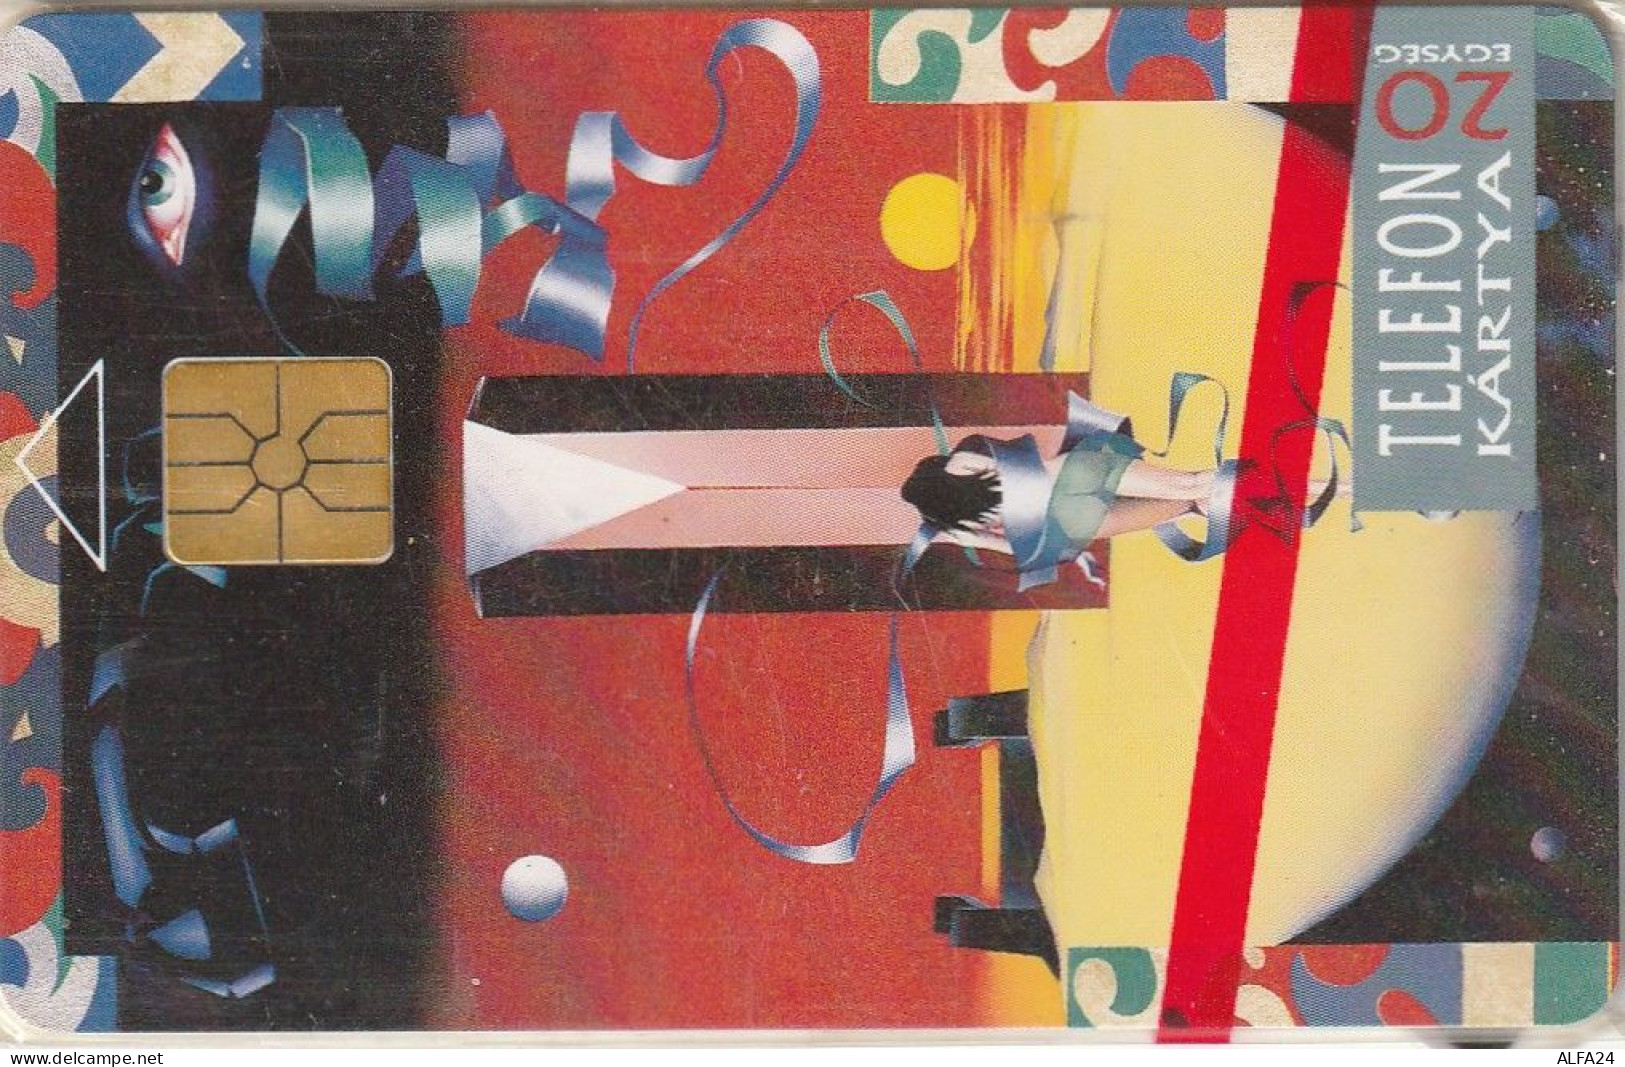 PHONE CARD UNGHERIA BLISTER (CZ1486 - Hungary